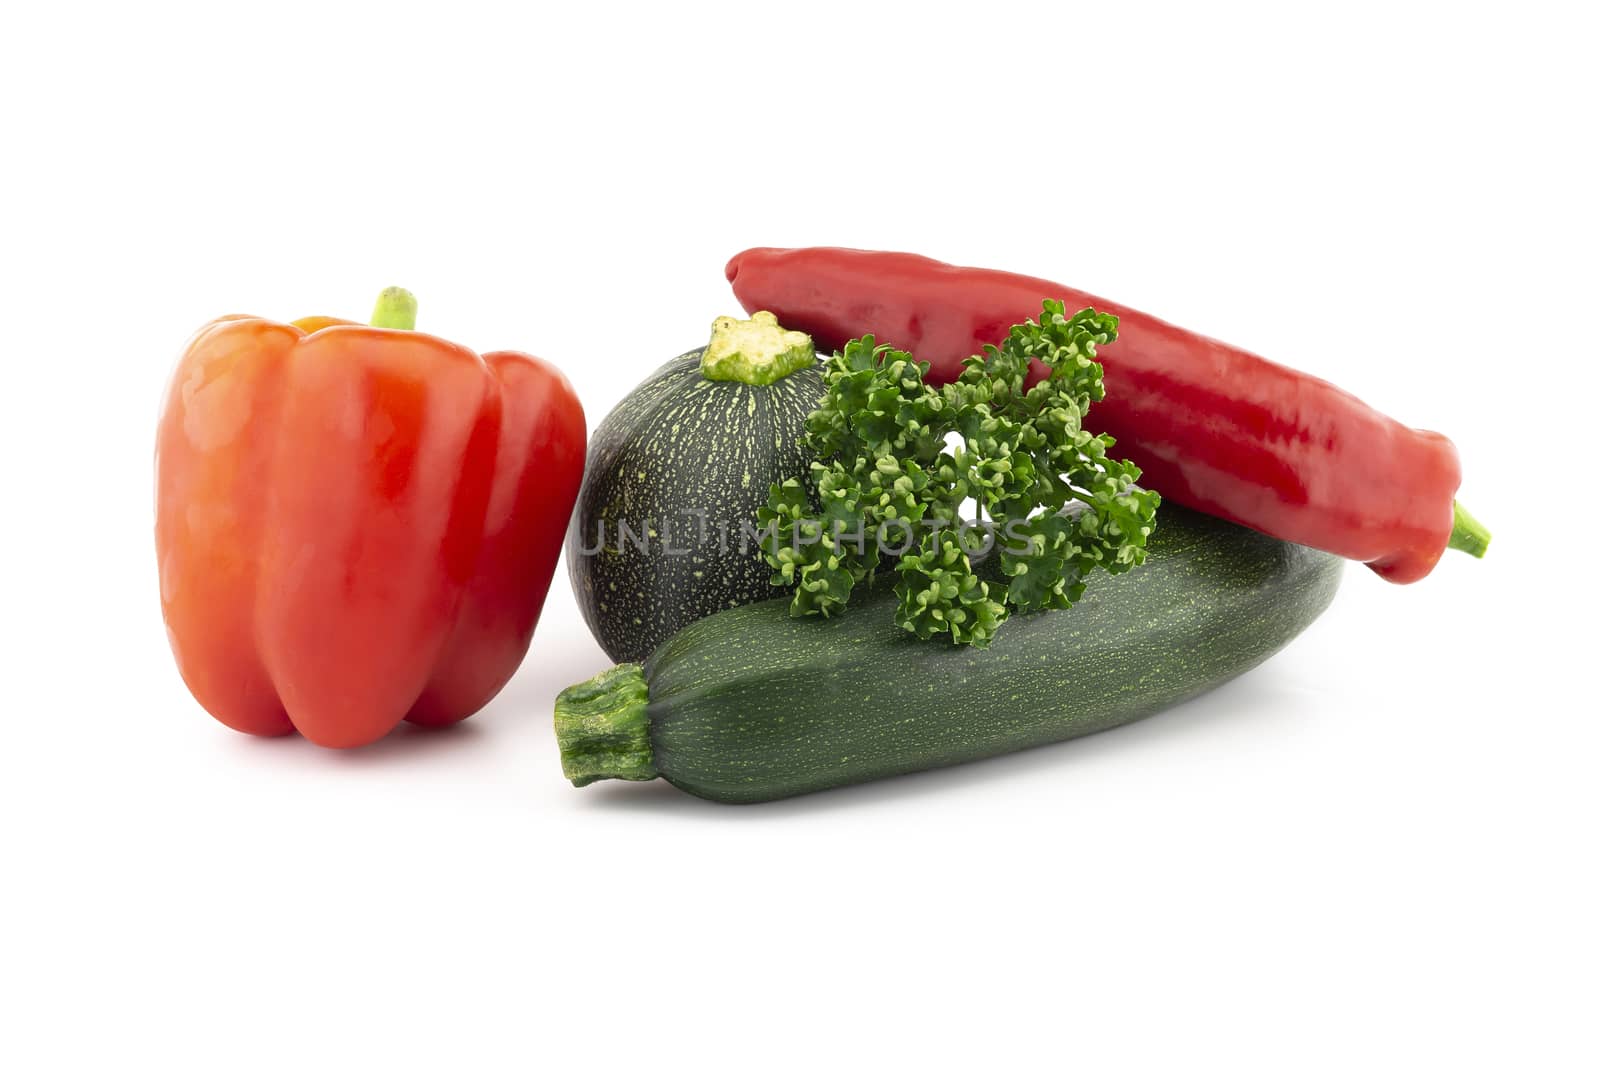 Green round and traditional courgette or zucchini, fresh parsley sprigs and red pepper isolated on white background